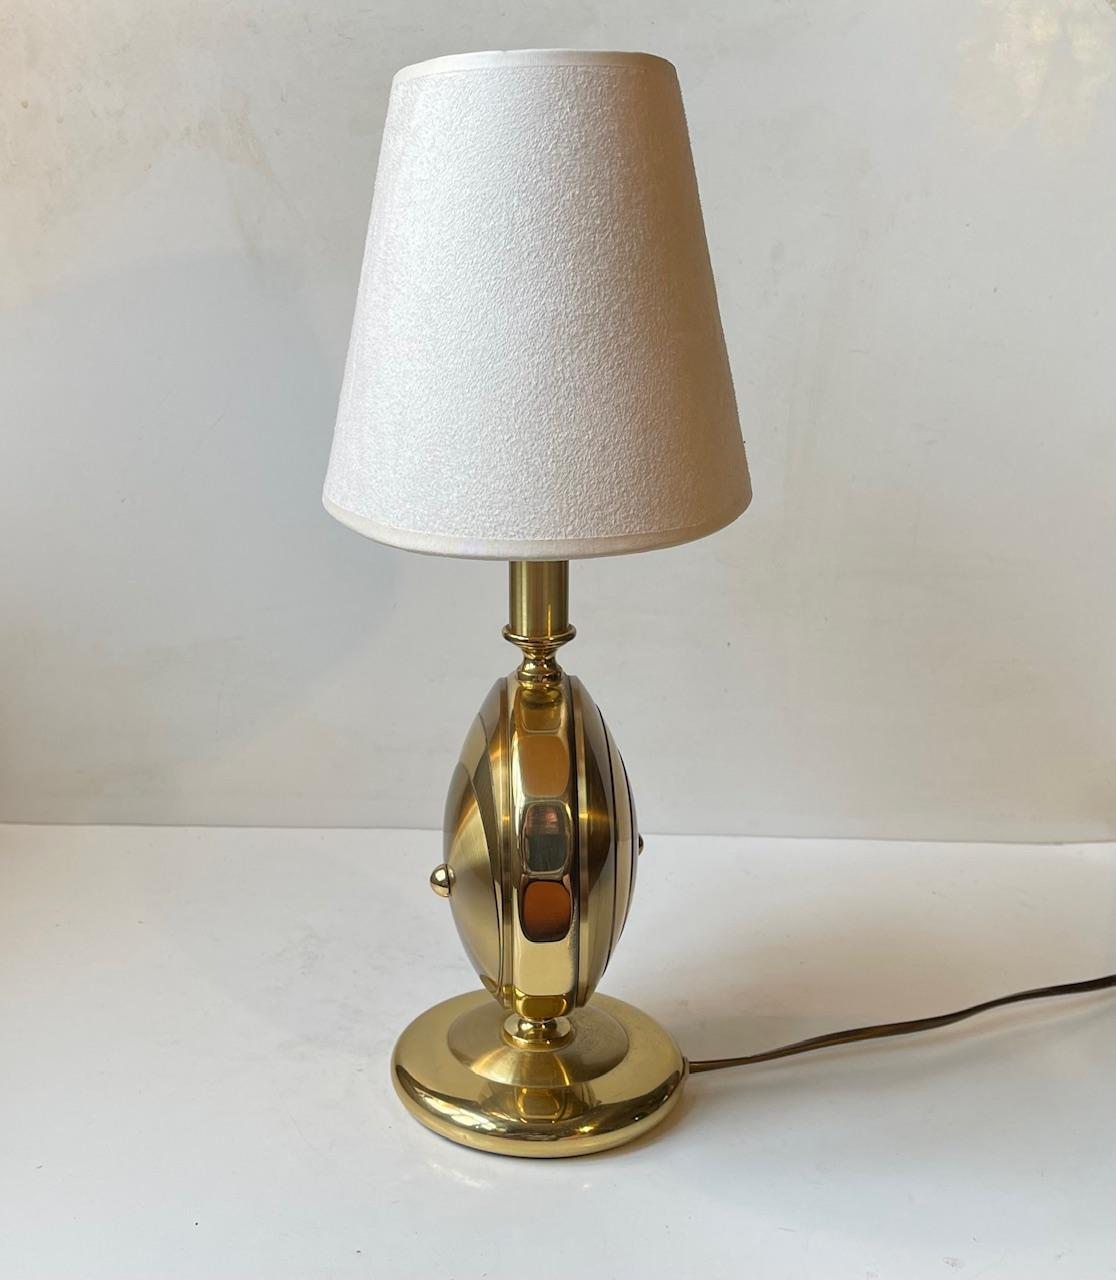 Polished Art Deco Revival Mantle Table Lamp in Brass by TS Belysning, 1980s For Sale